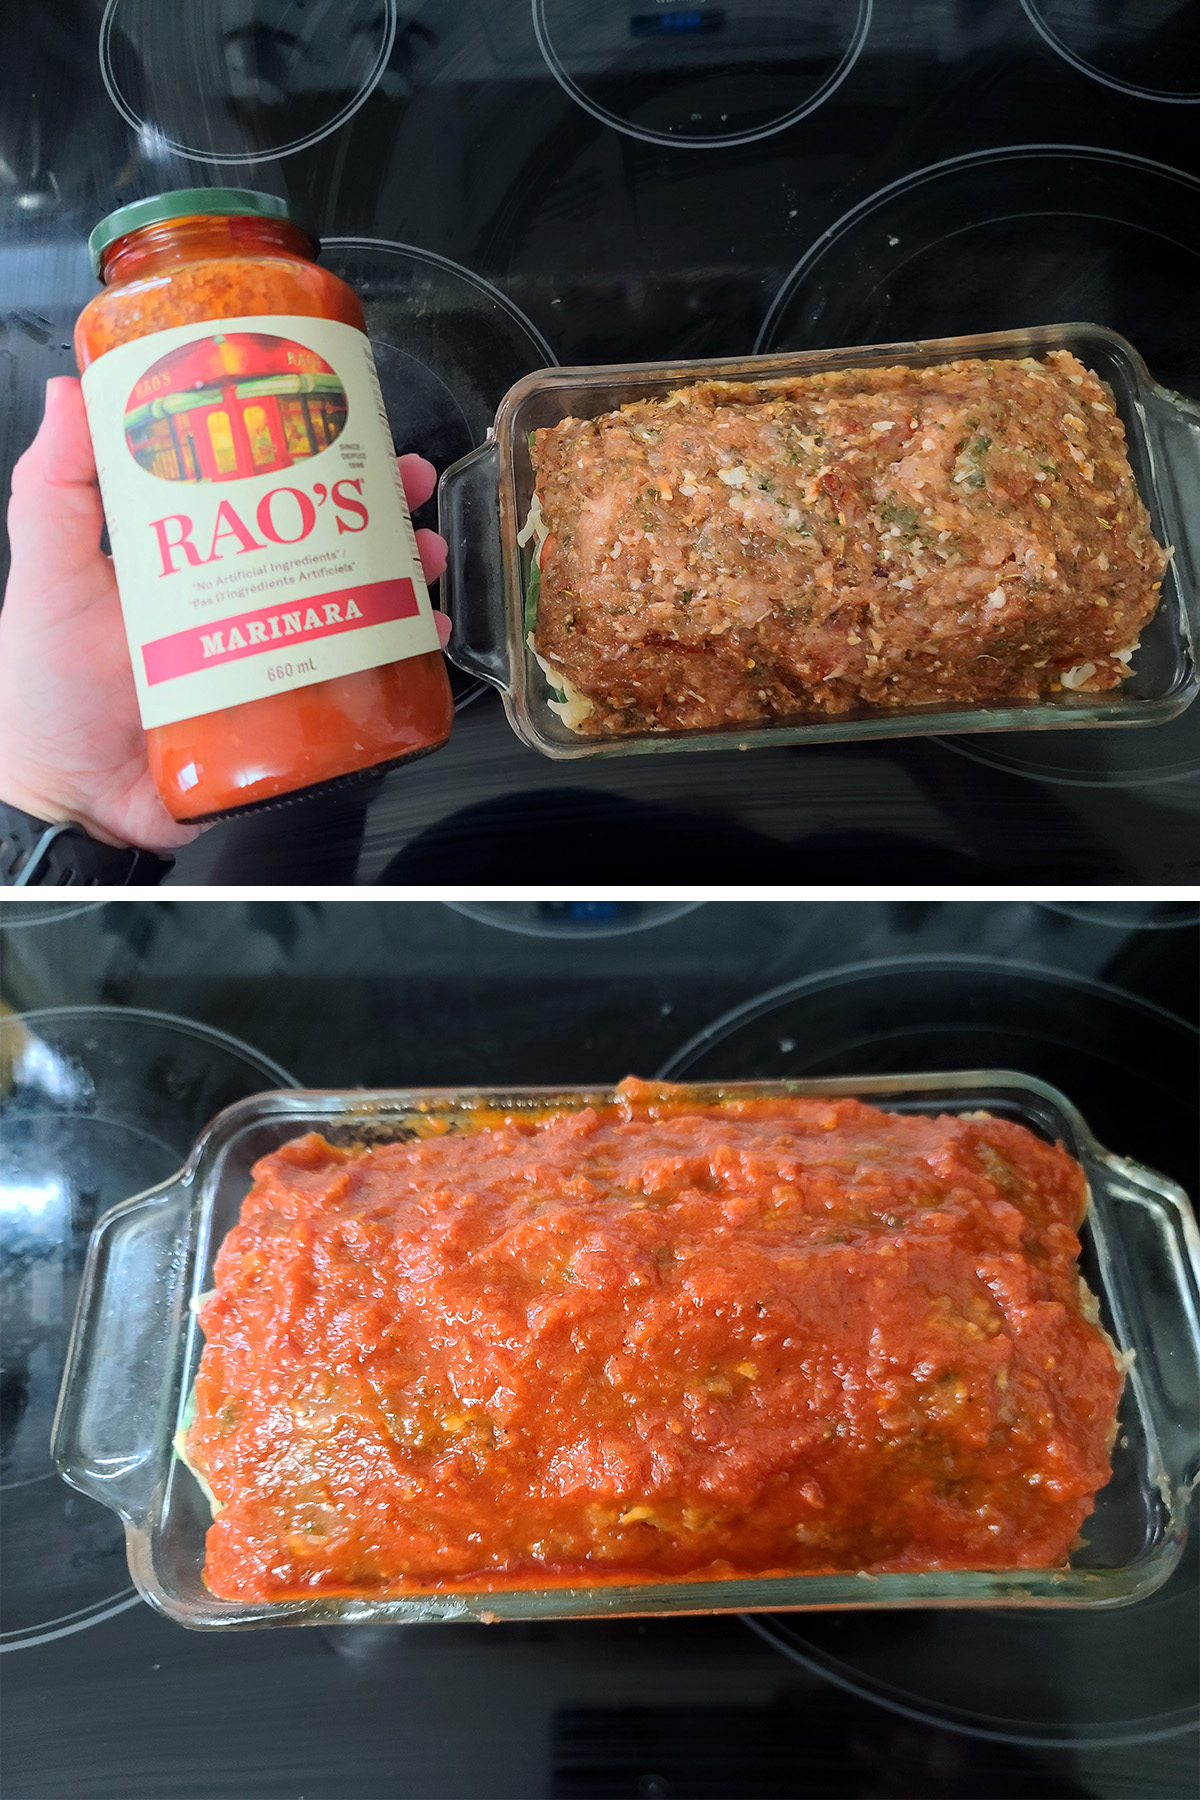 A hand holding a jar of Rao's marinara sauce next to the meatloaf, then the meatloaf with sauce sperad on top.